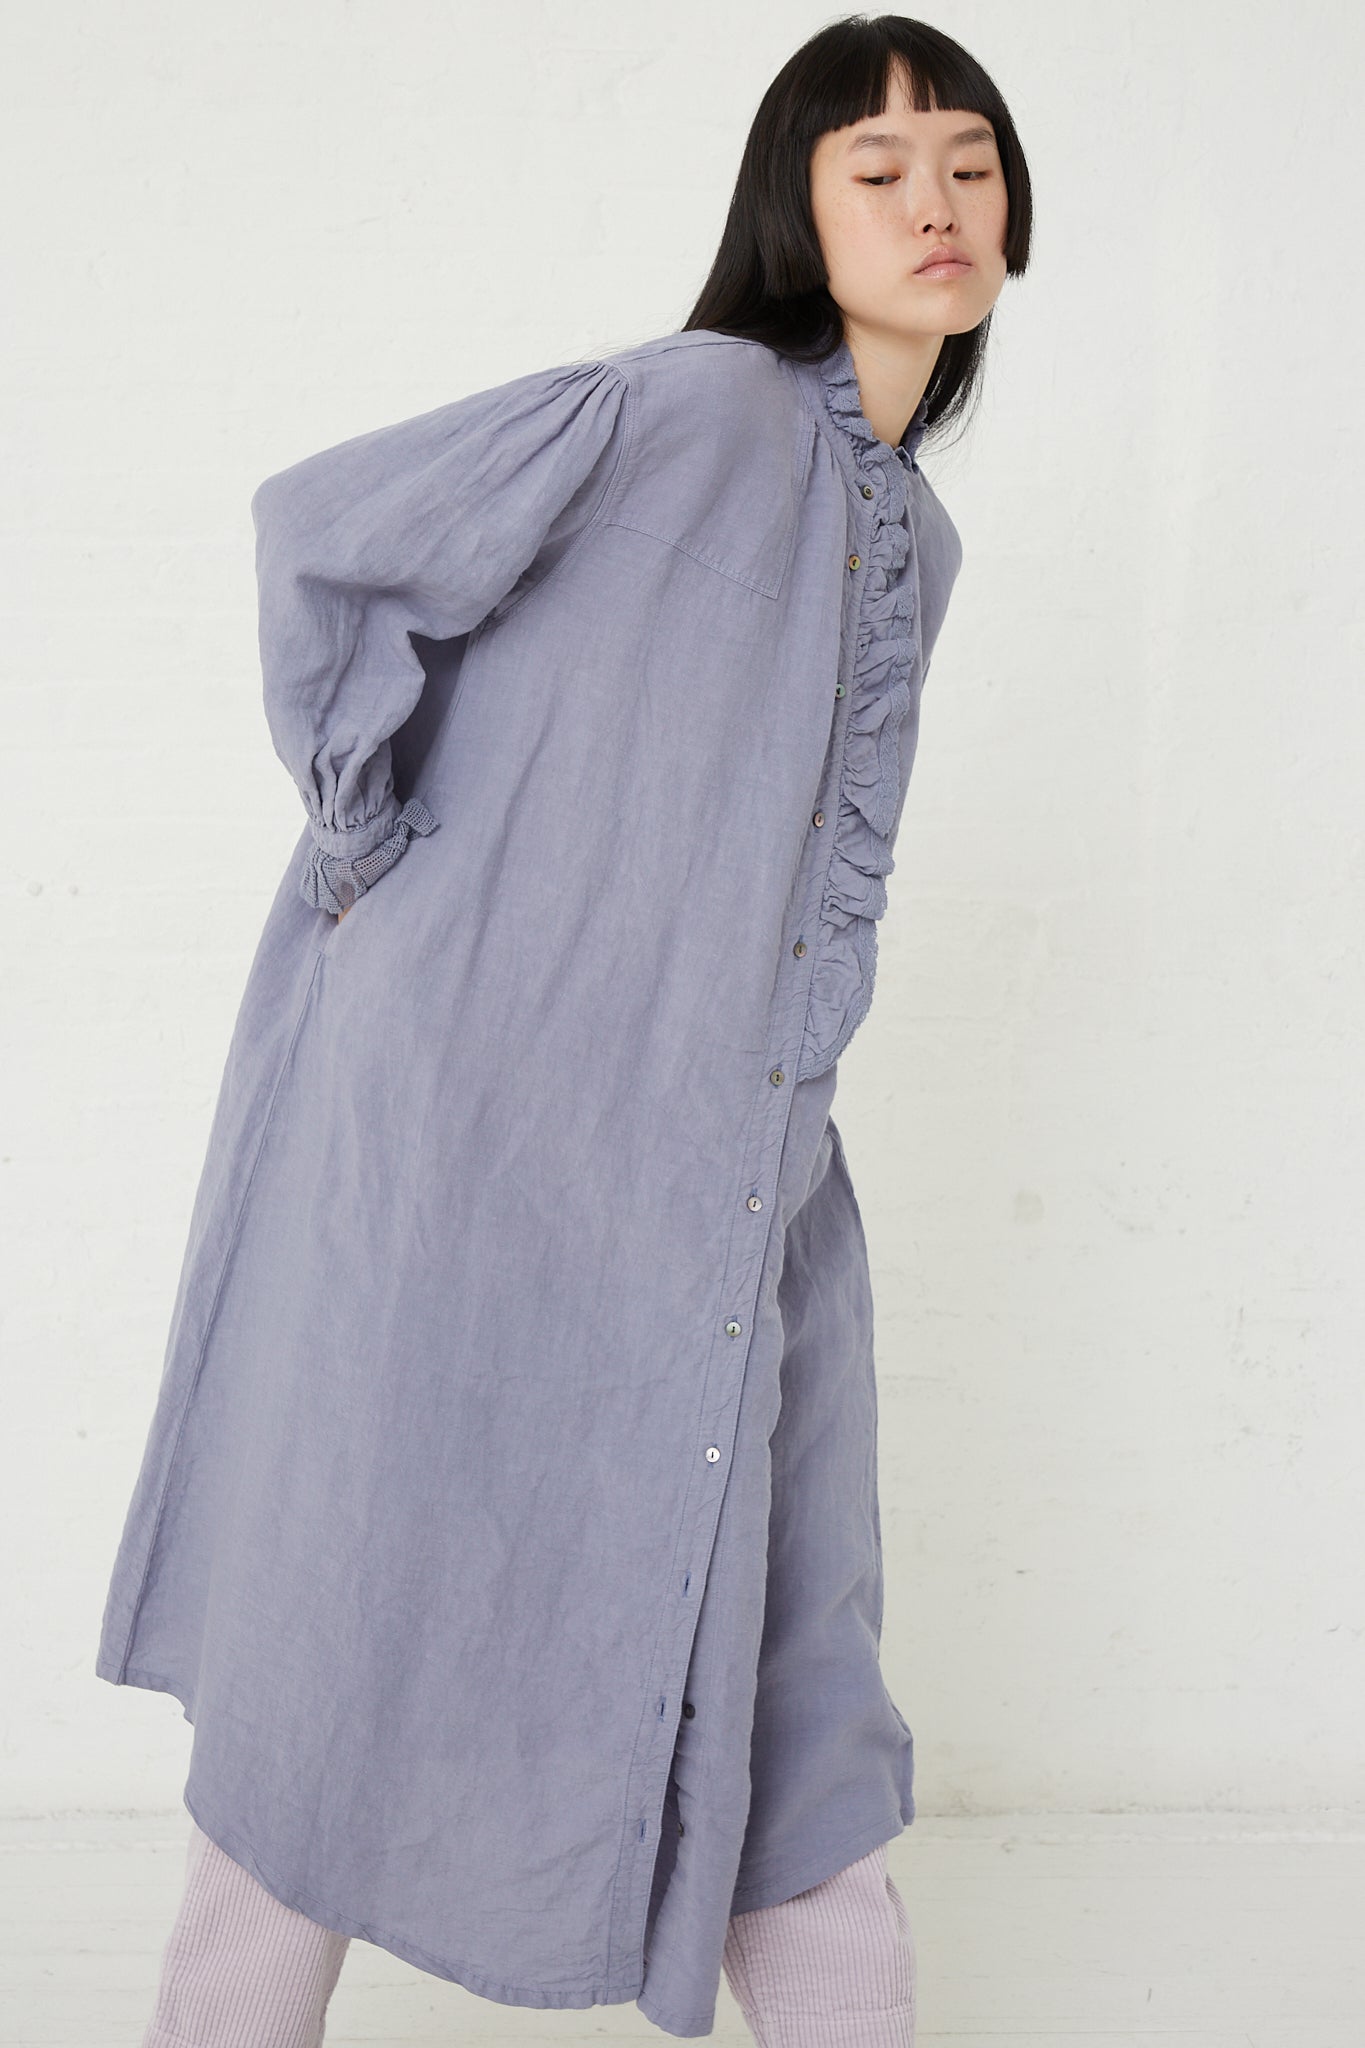 The model is wearing a nest Robe Linen Cotton Lace Omi-Zarashi Dress in Lavender with ruffles.